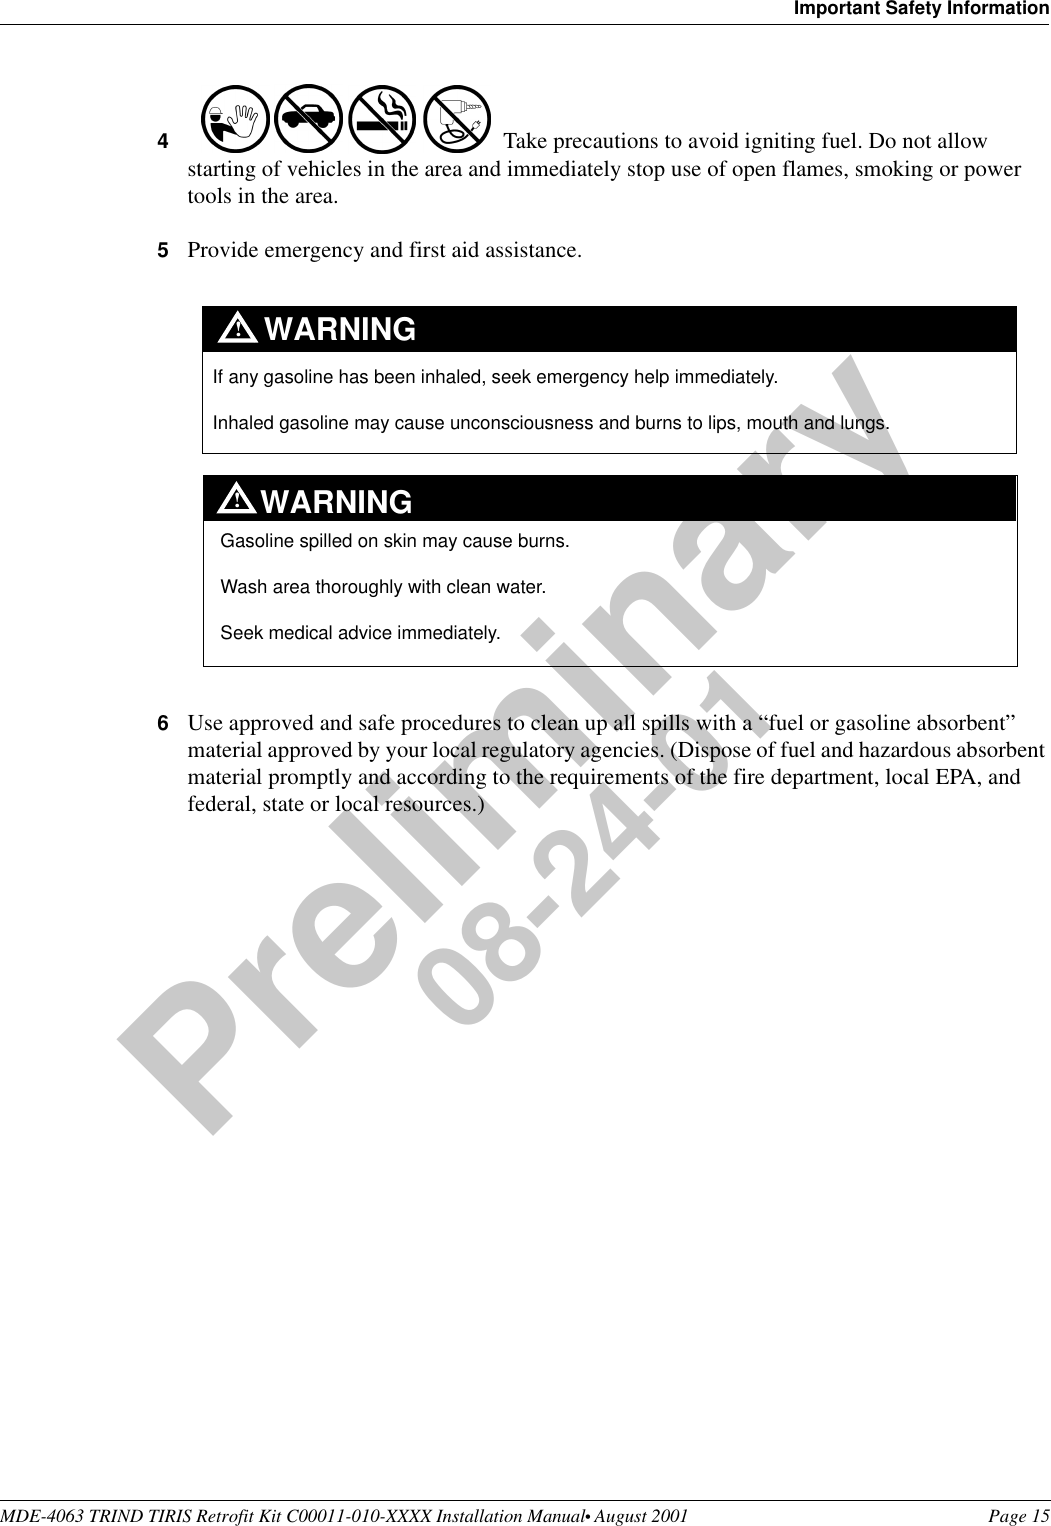 MDE-4063 TRIND TIRIS Retrofit Kit C00011-010-XXXX Installation Manual• August 2001 Page 15Important Safety InformationPreliminary08-24-014Take precautions to avoid igniting fuel. Do not allow starting of vehicles in the area and immediately stop use of open flames, smoking or power tools in the area.5Provide emergency and first aid assistance. 6Use approved and safe procedures to clean up all spills with a “fuel or gasoline absorbent” material approved by your local regulatory agencies. (Dispose of fuel and hazardous absorbent material promptly and according to the requirements of the fire department, local EPA, and federal, state or local resources.)If any gasoline has been inhaled, seek emergency help immediately. Inhaled gasoline may cause unconsciousness and burns to lips, mouth and lungs.WARNINGGasoline spilled on skin may cause burns.Wash area thoroughly with clean water. Seek medical advice immediately.WARNING!!